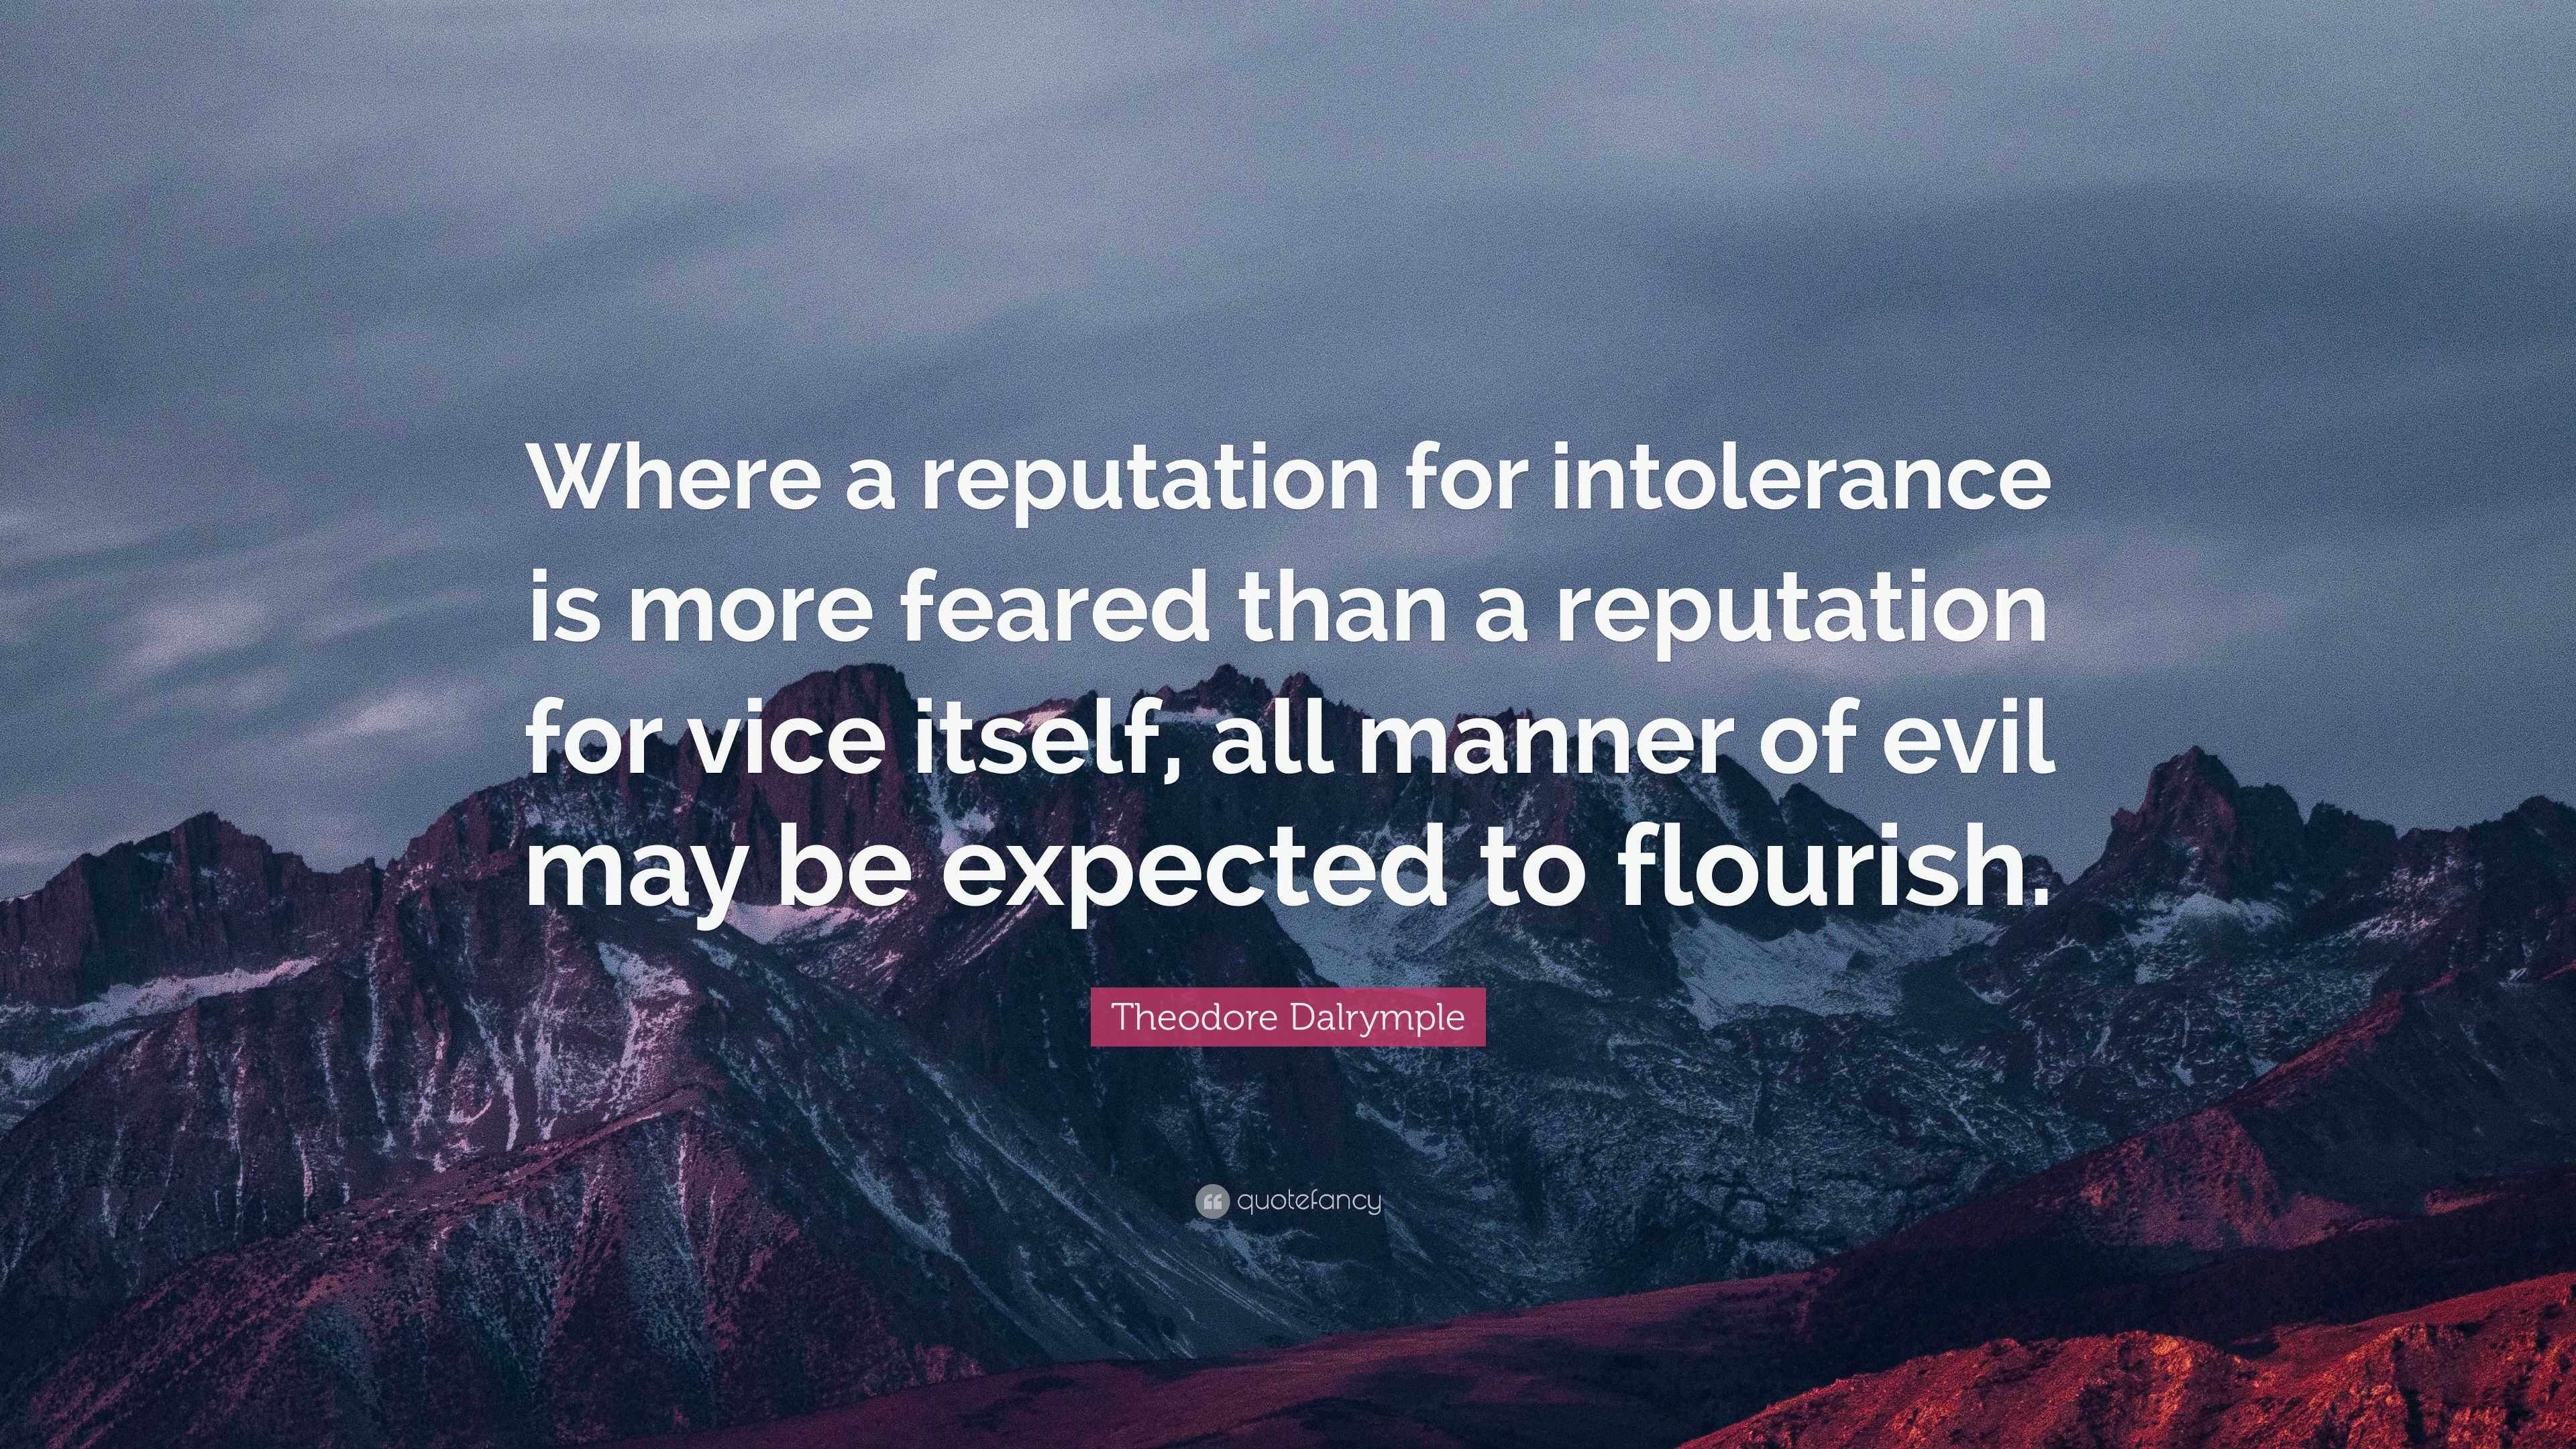 Theodore Dalrymple Quote: “Where a reputation for intolerance is more ...